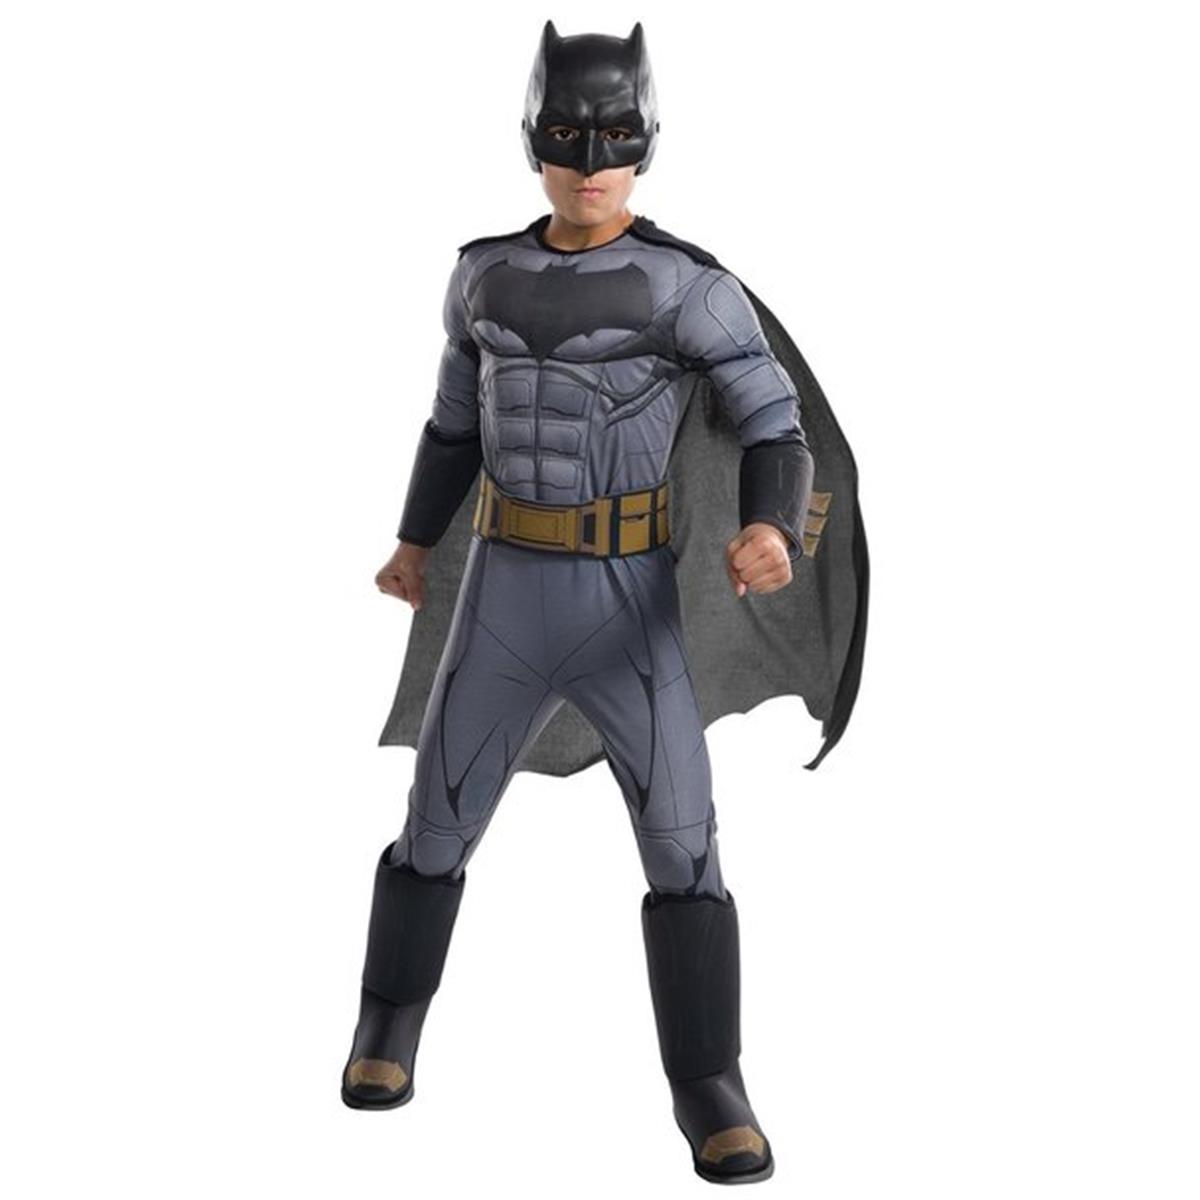 Picture of Rubies 249200 Justice League Movie Batman Deluxe Child Costume, Small